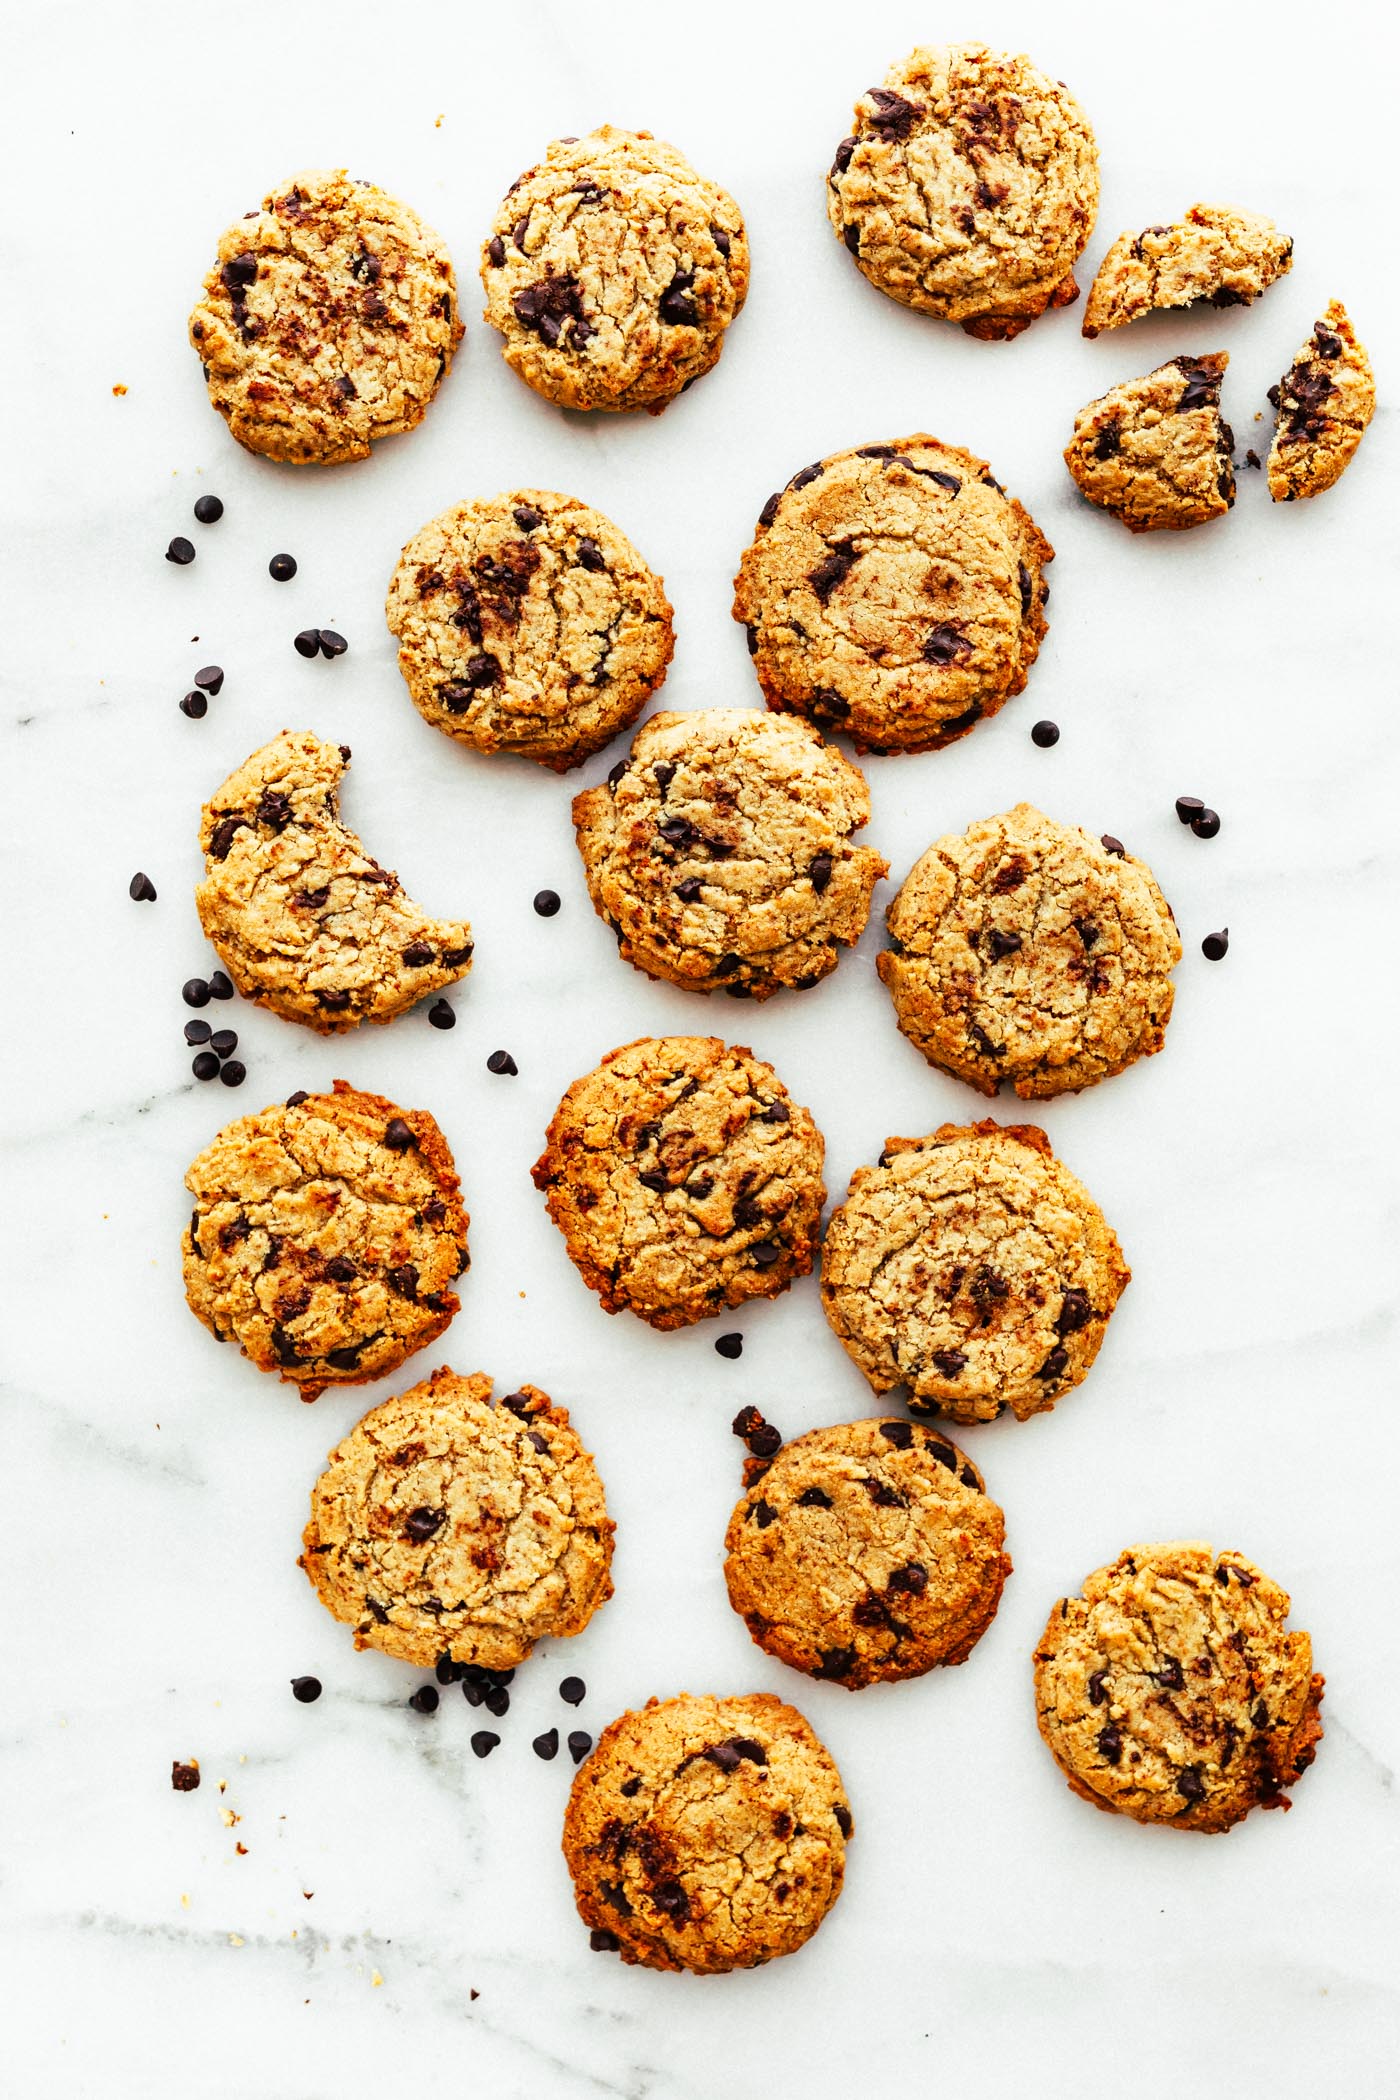 The BEST Vegan CHOCOLATE CHIP COOKIES do exist! Yes, and PALEO TOO! Chocolate chip cookies recipe that will blow your mind and your taste buds! So simple, made with few ingredients, crispy outside, light in texture, and all things delicious! www.cottercrunch.com